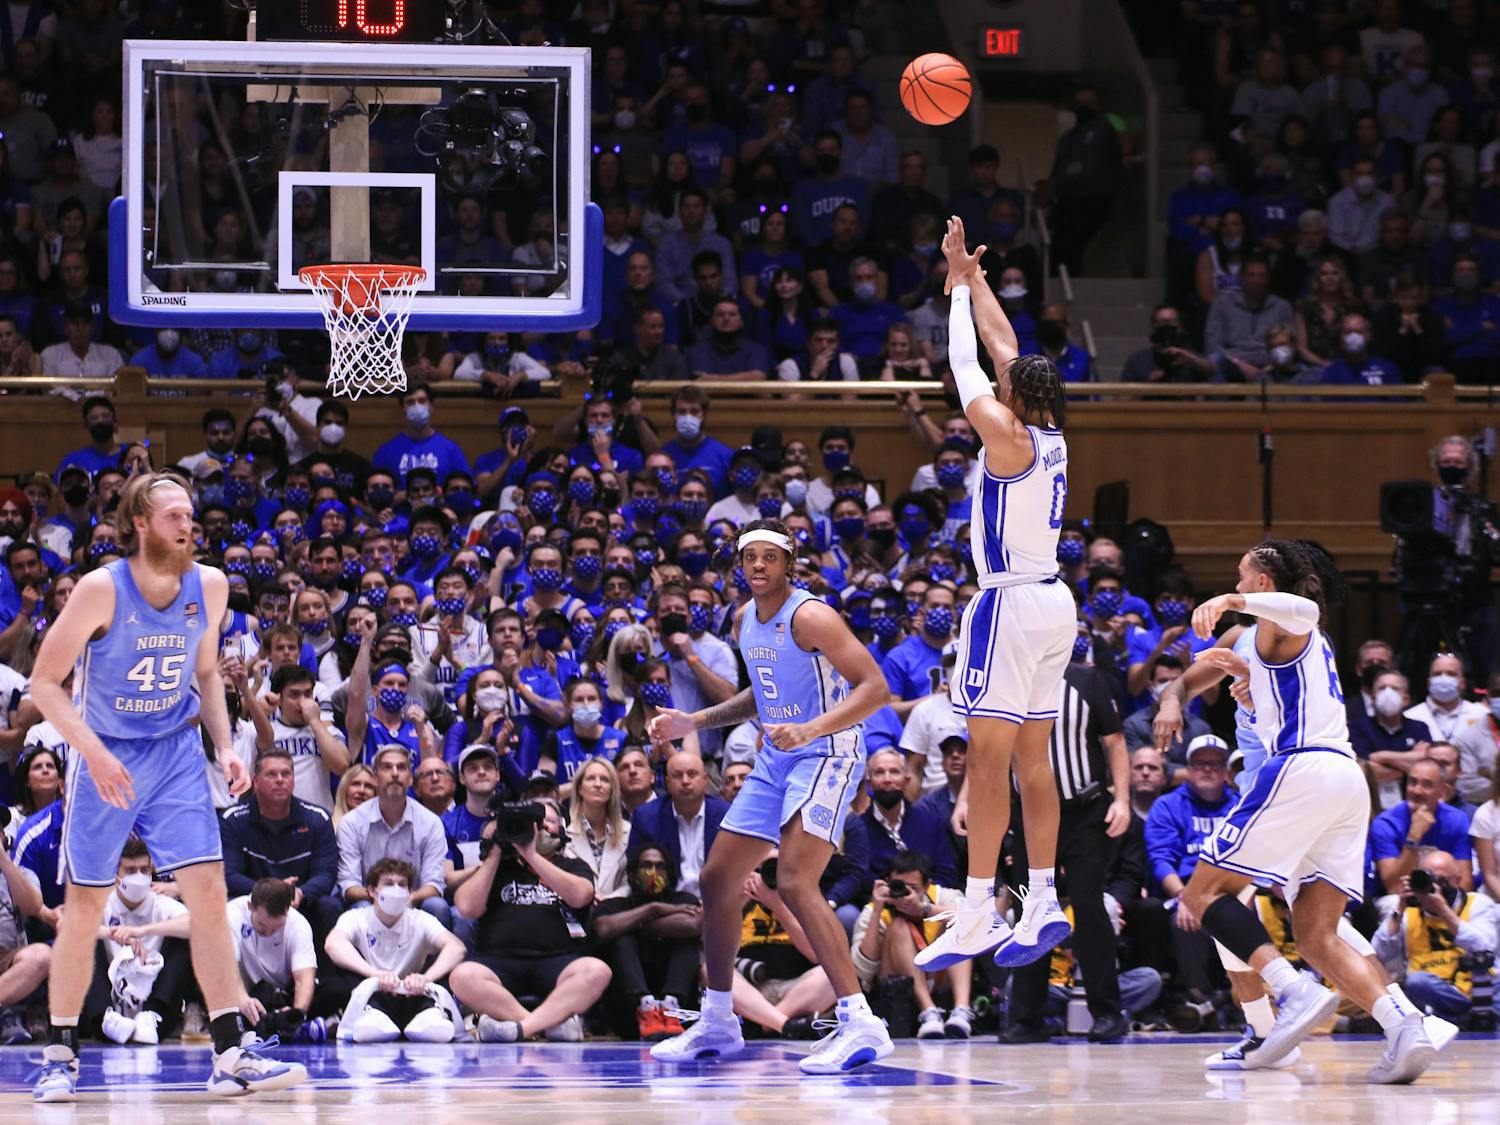 North Carolina joined Duke in the AP Poll after winning Saturday's rivalry matchup in Durham.